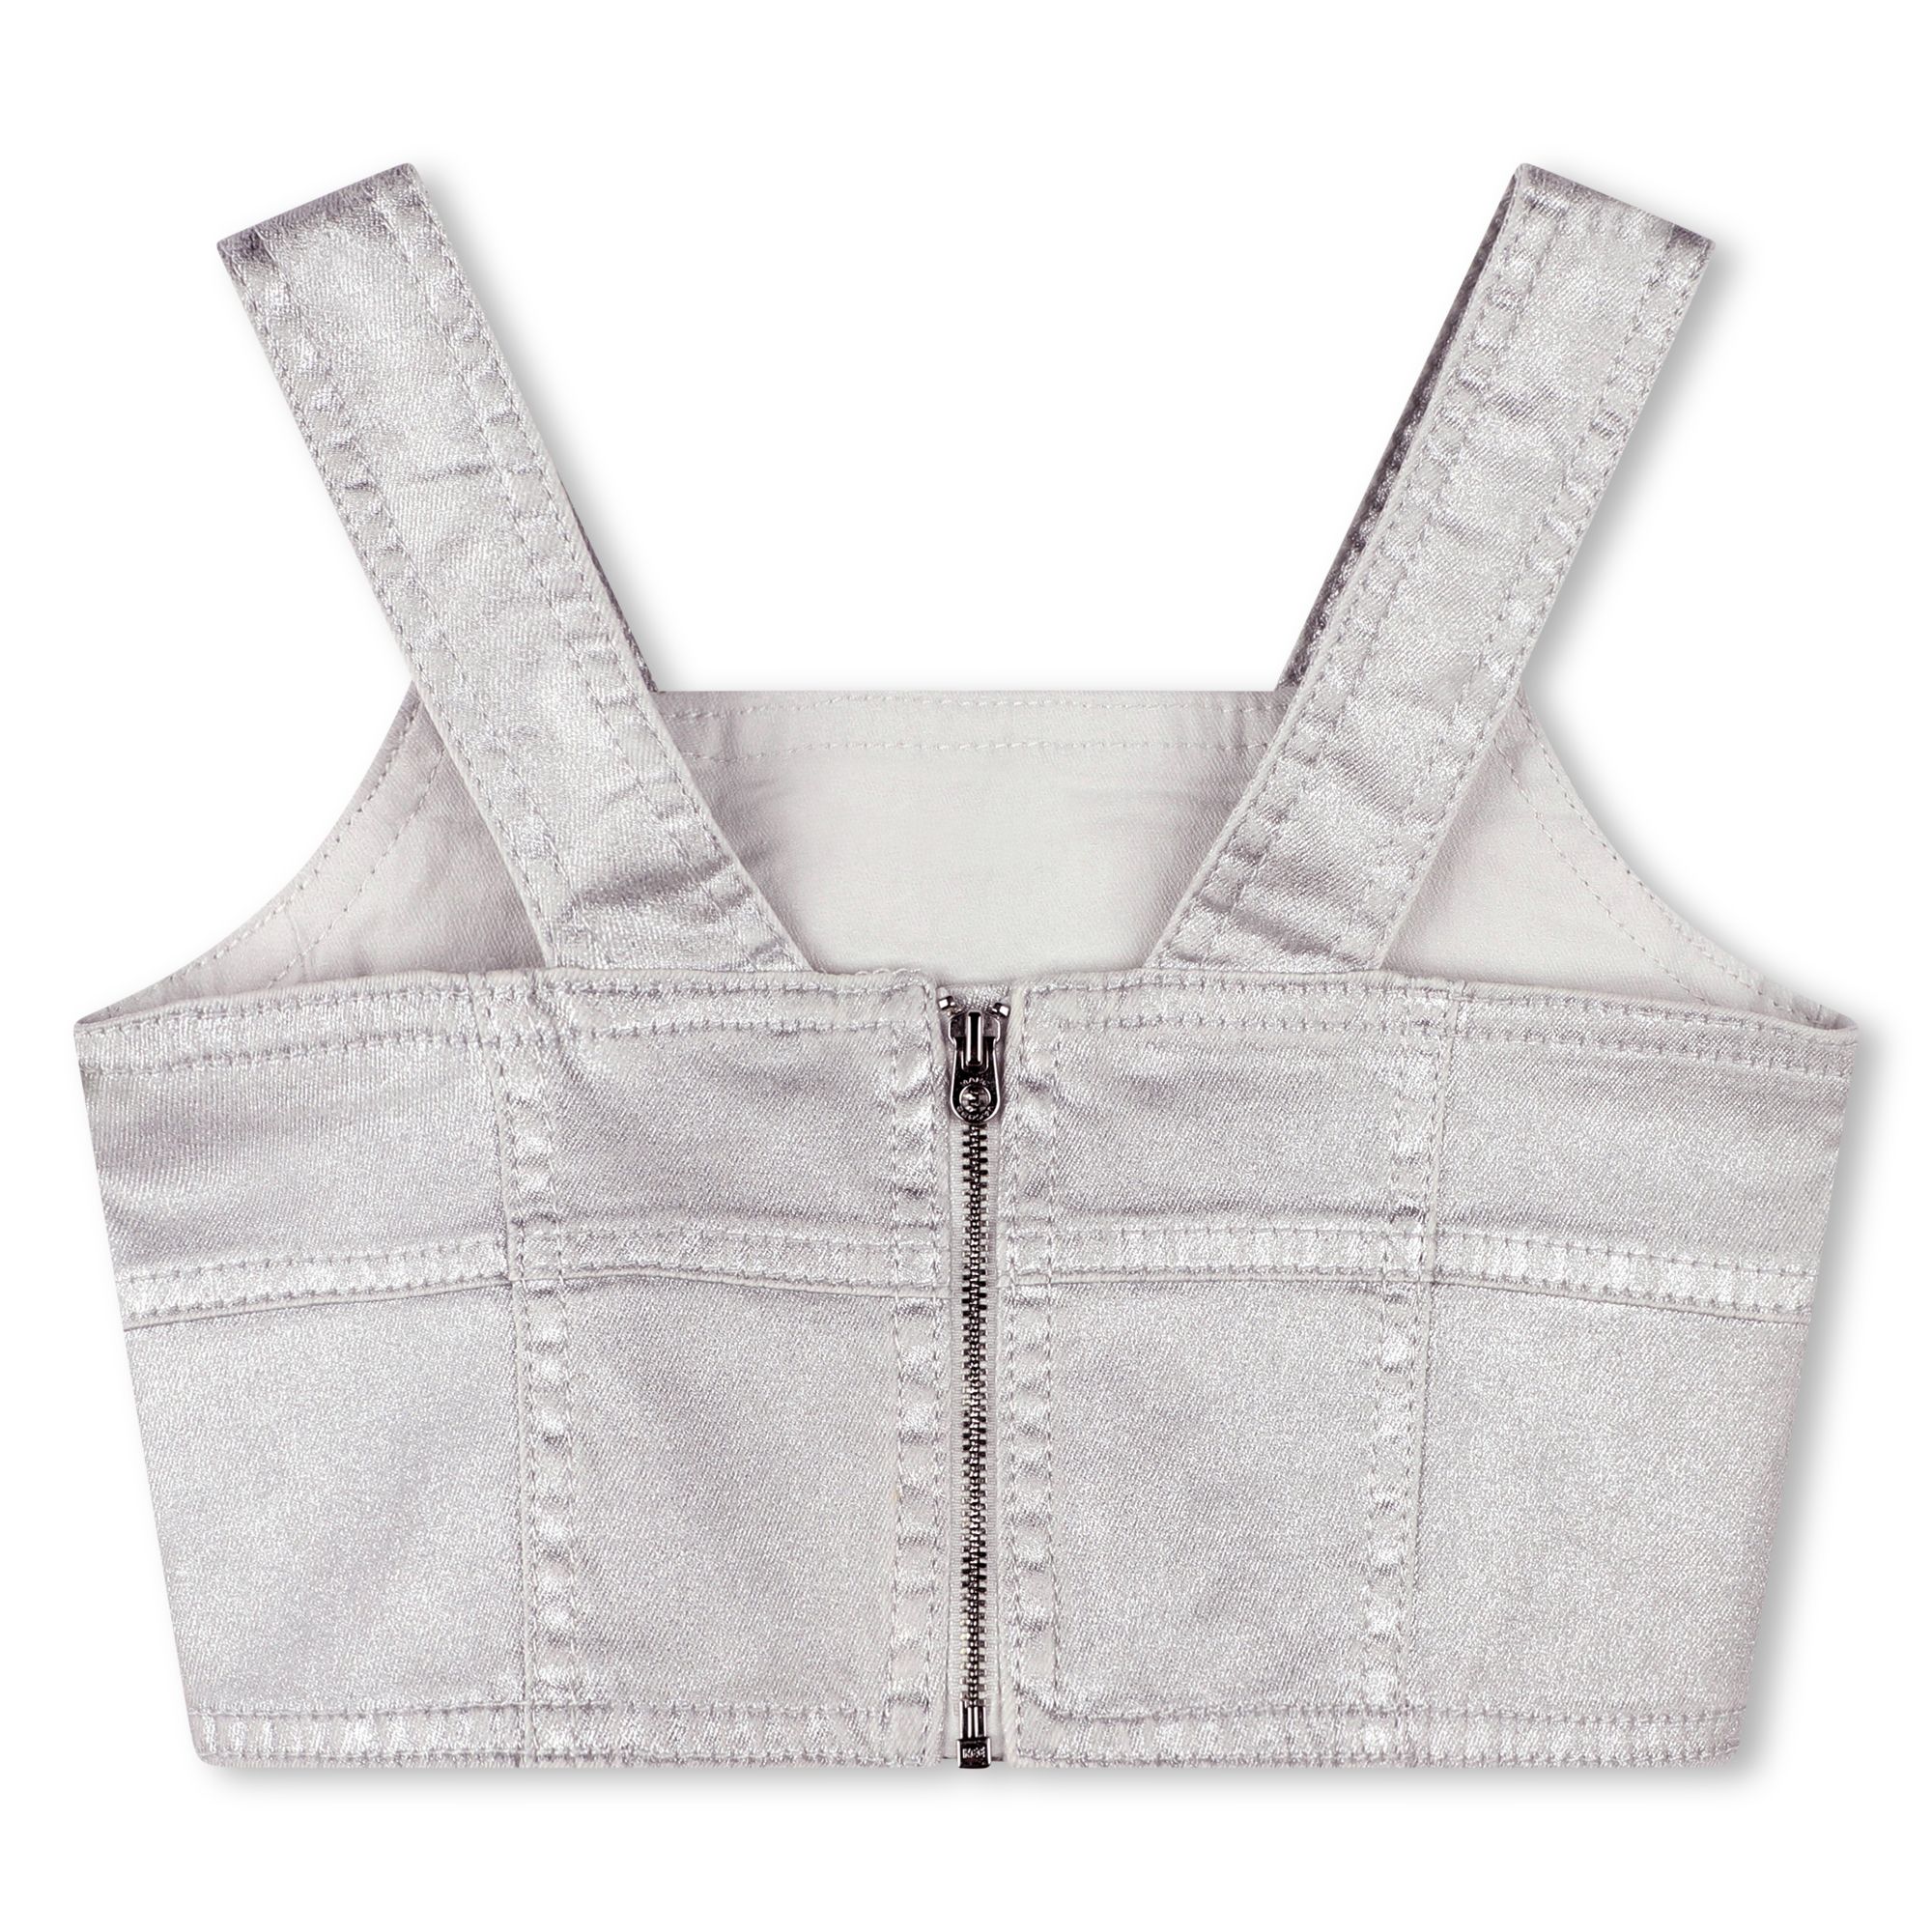 Crop top con spalline in jeans MARC JACOBS Per BAMBINA